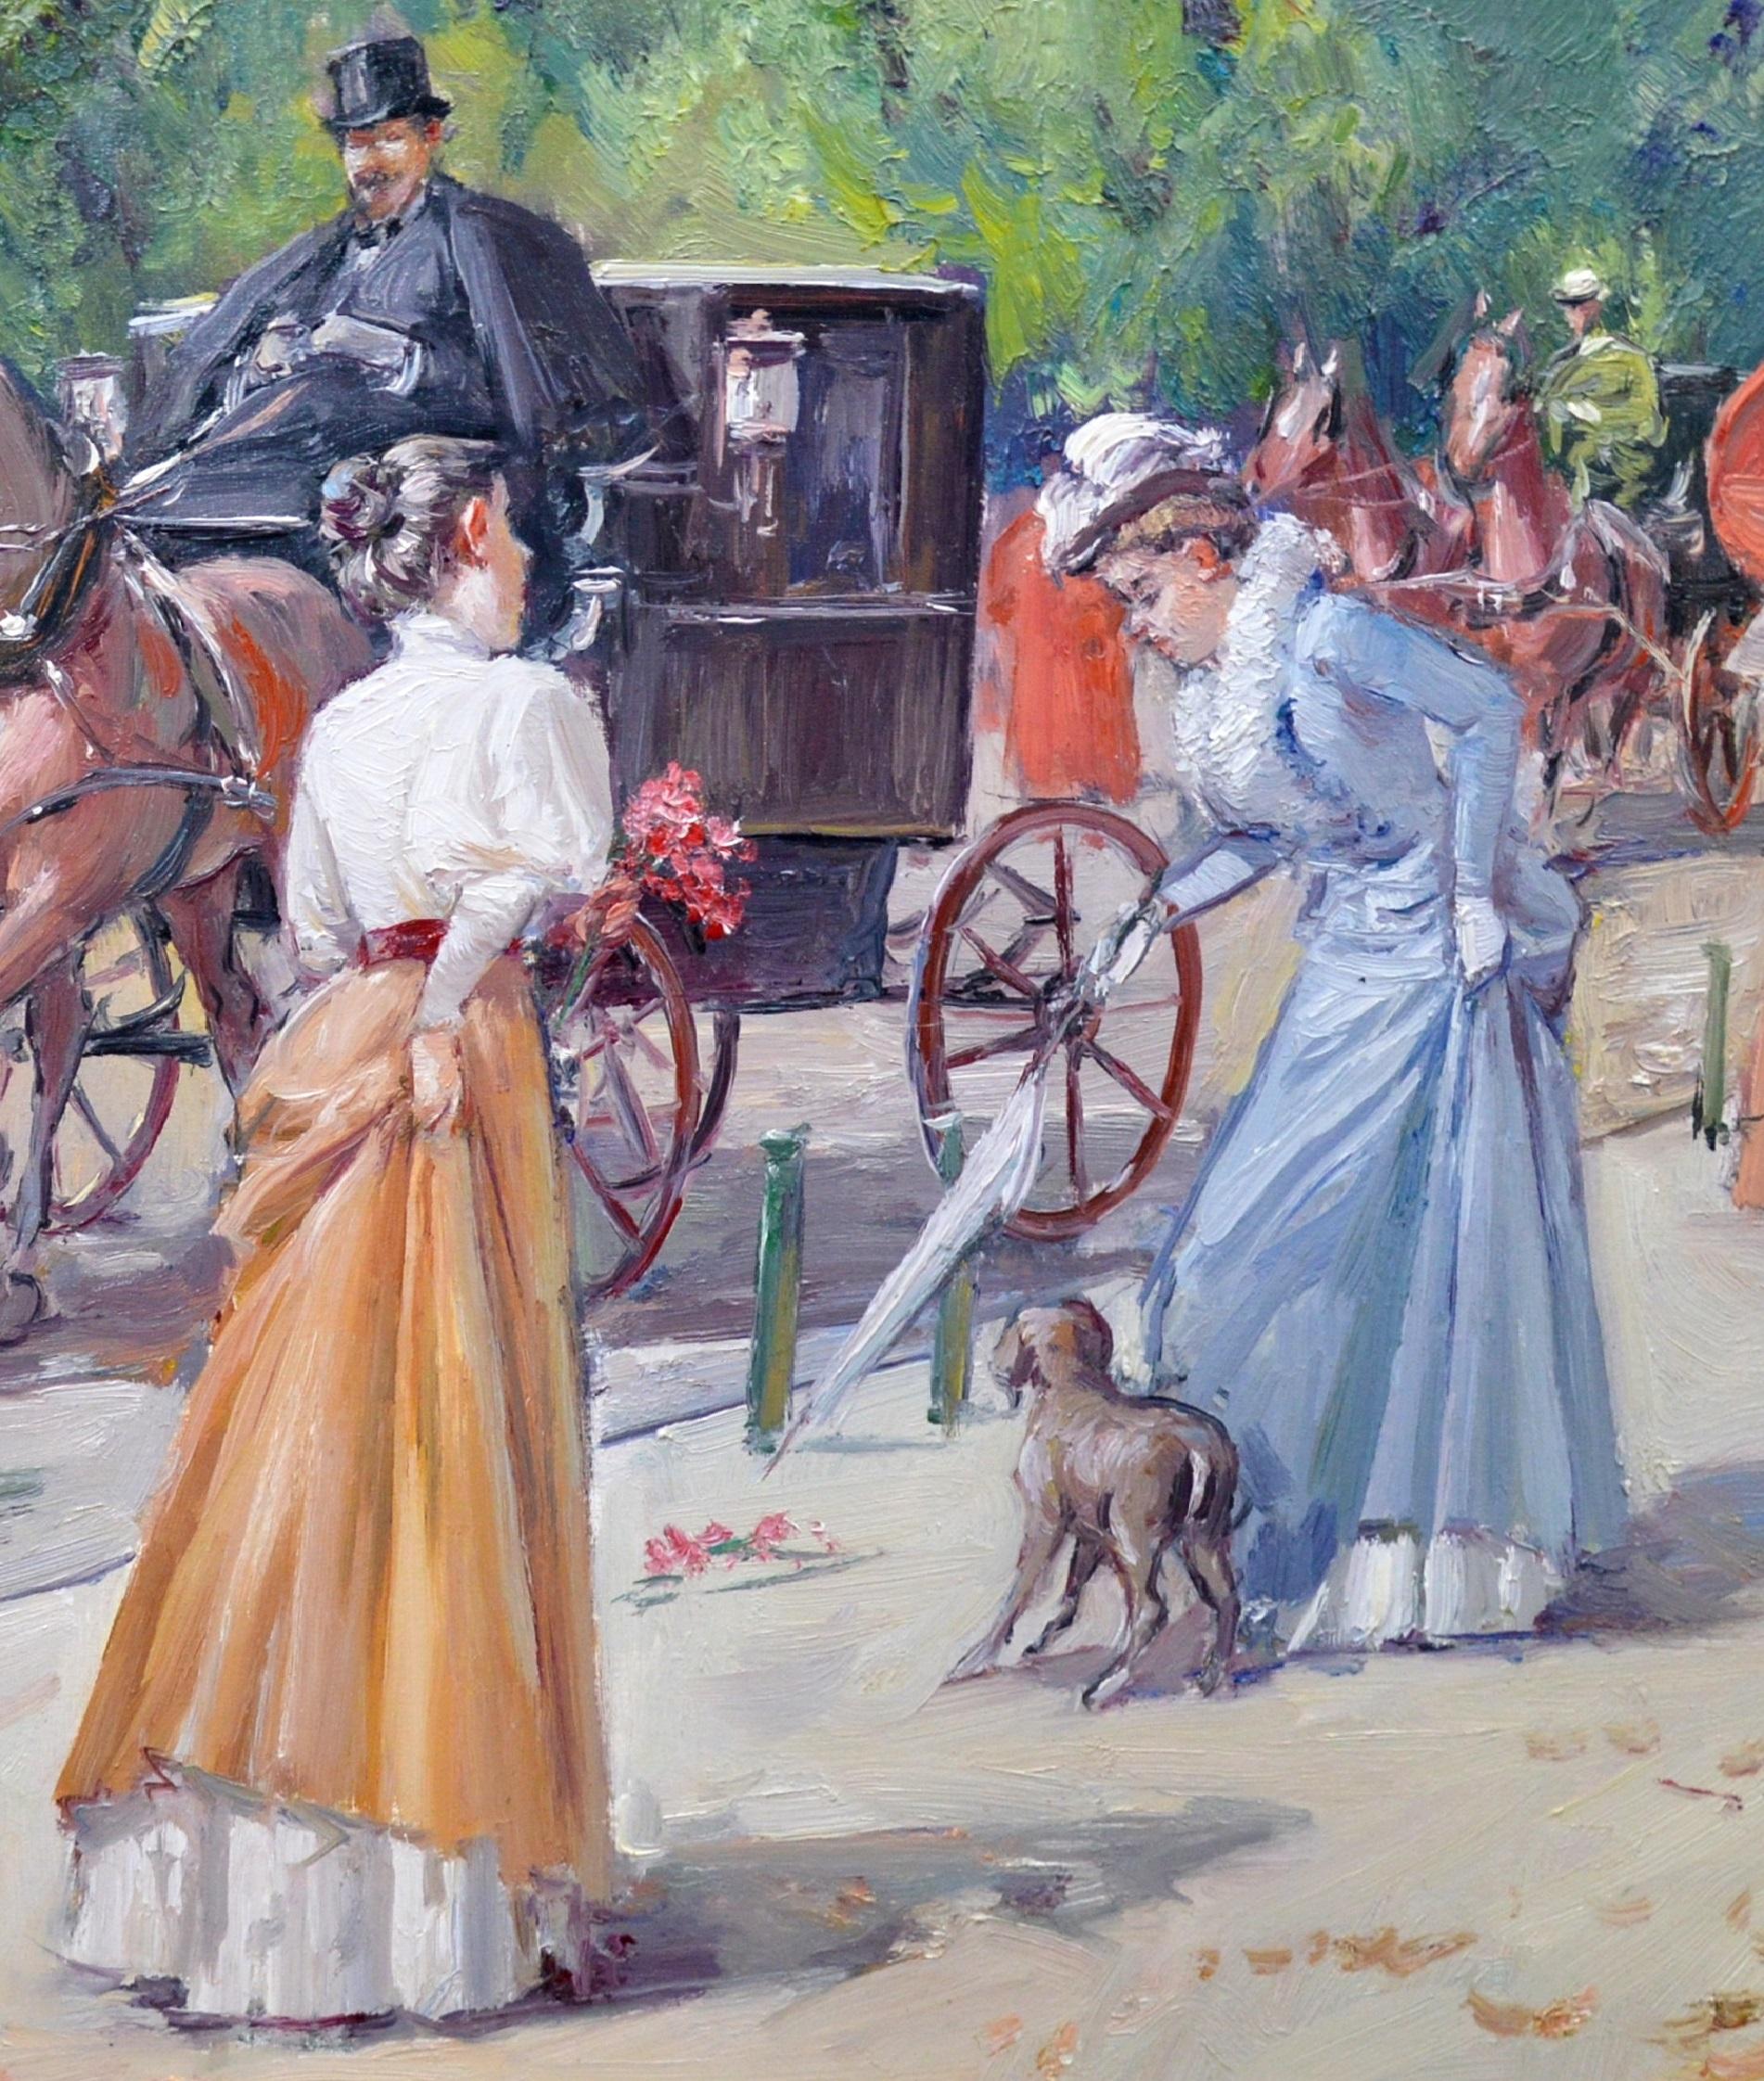 A fine large oil on canvas depicting a late 19th century scene in the famous ‘Jardin des Tuileries’ in Paris, France by the popular Spanish Post-Impressionist painter Juan Soler (1951-). The painting is signed by the artist and hangs in a very good